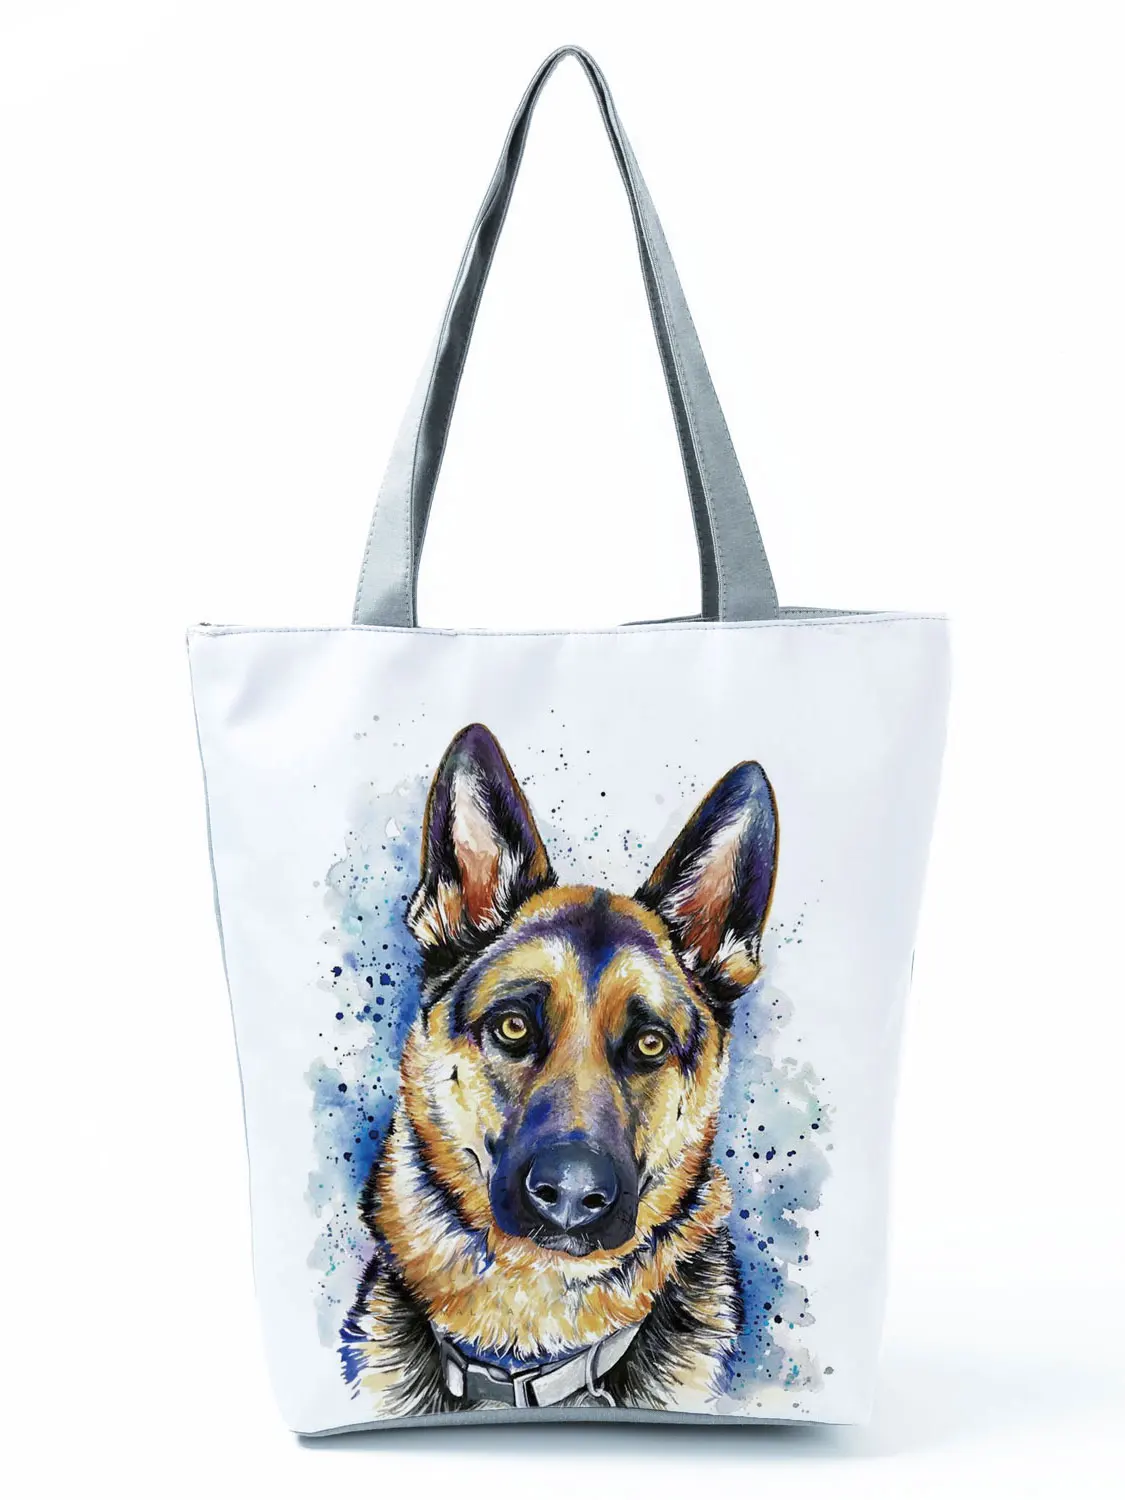 designer bags Squirrel Handbags Print Bags For Women Animal Graphic Lovely Pattern Tote Men Lady Cute Puppy Face Funny Pet Female Shoulder Bag wristlets for women Totes